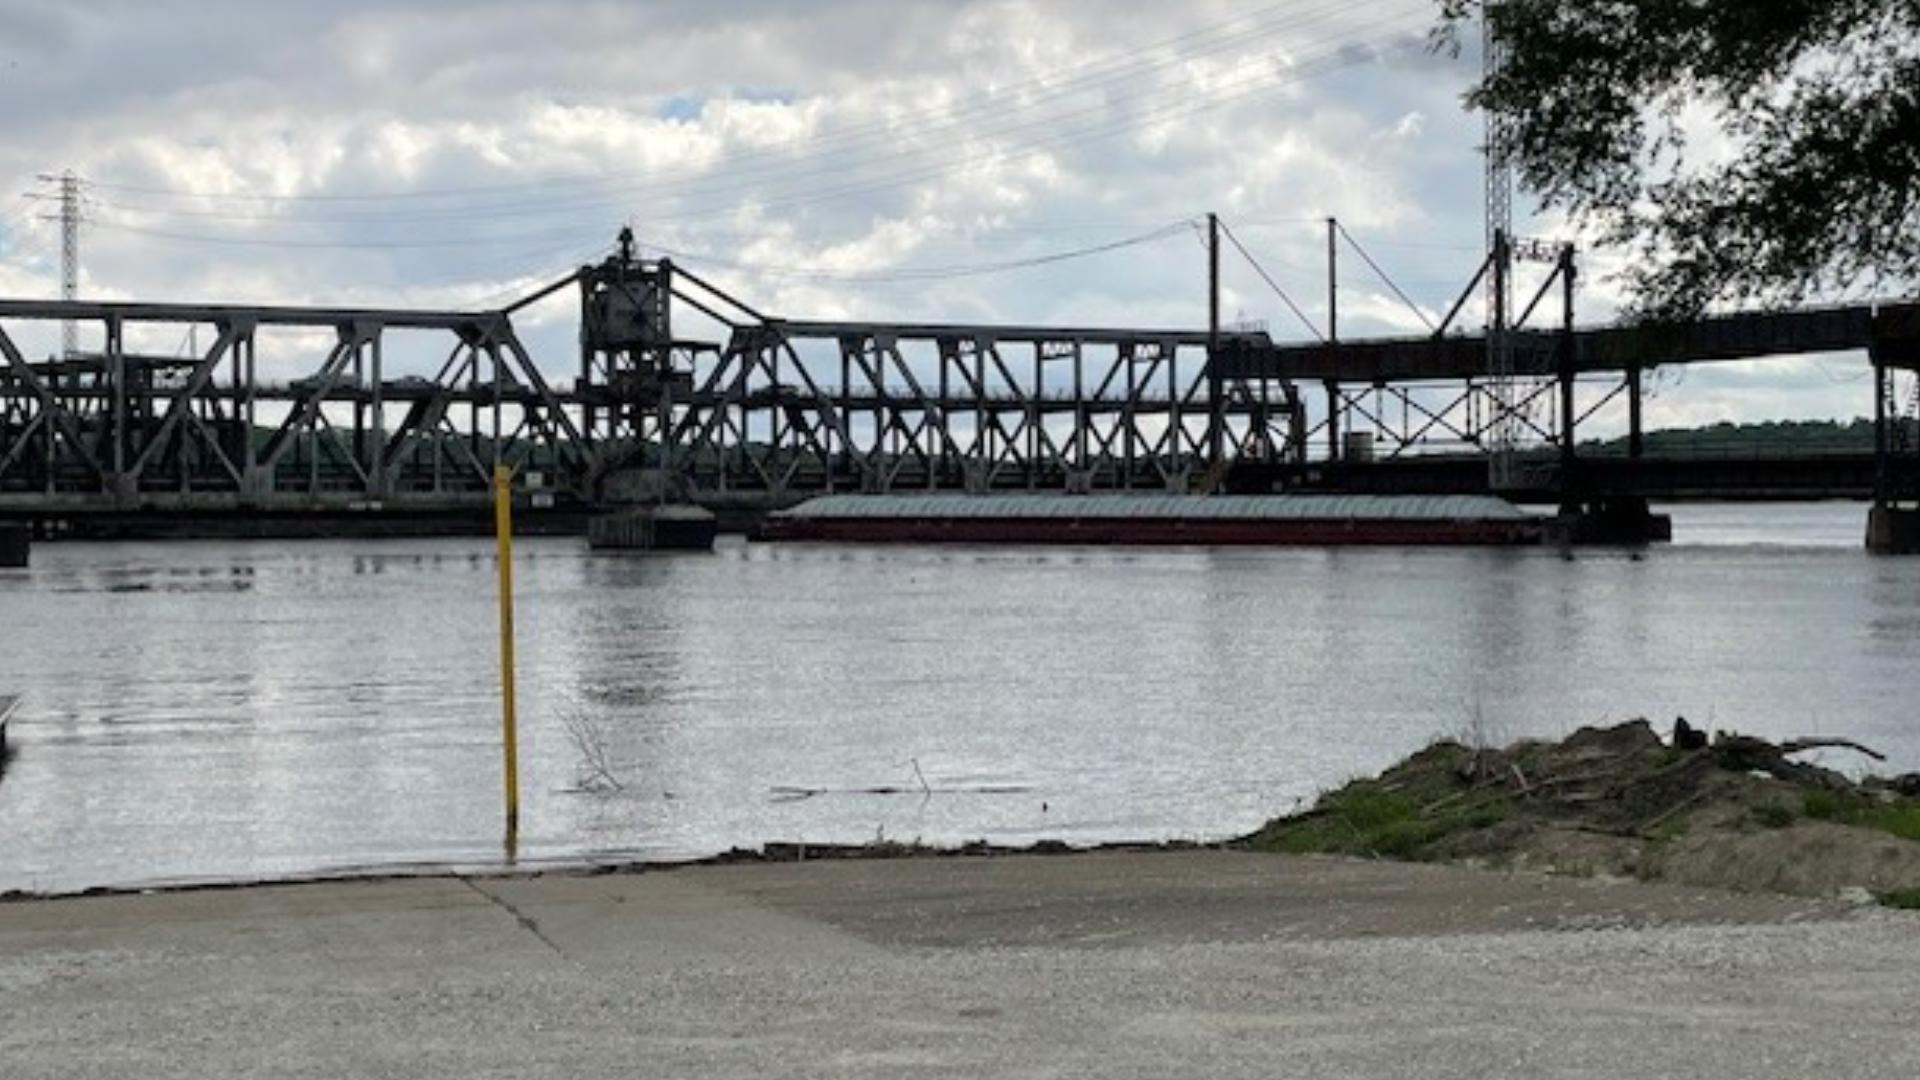 Fort Madison Bridge was struck by a barge on Thursday, May 9.